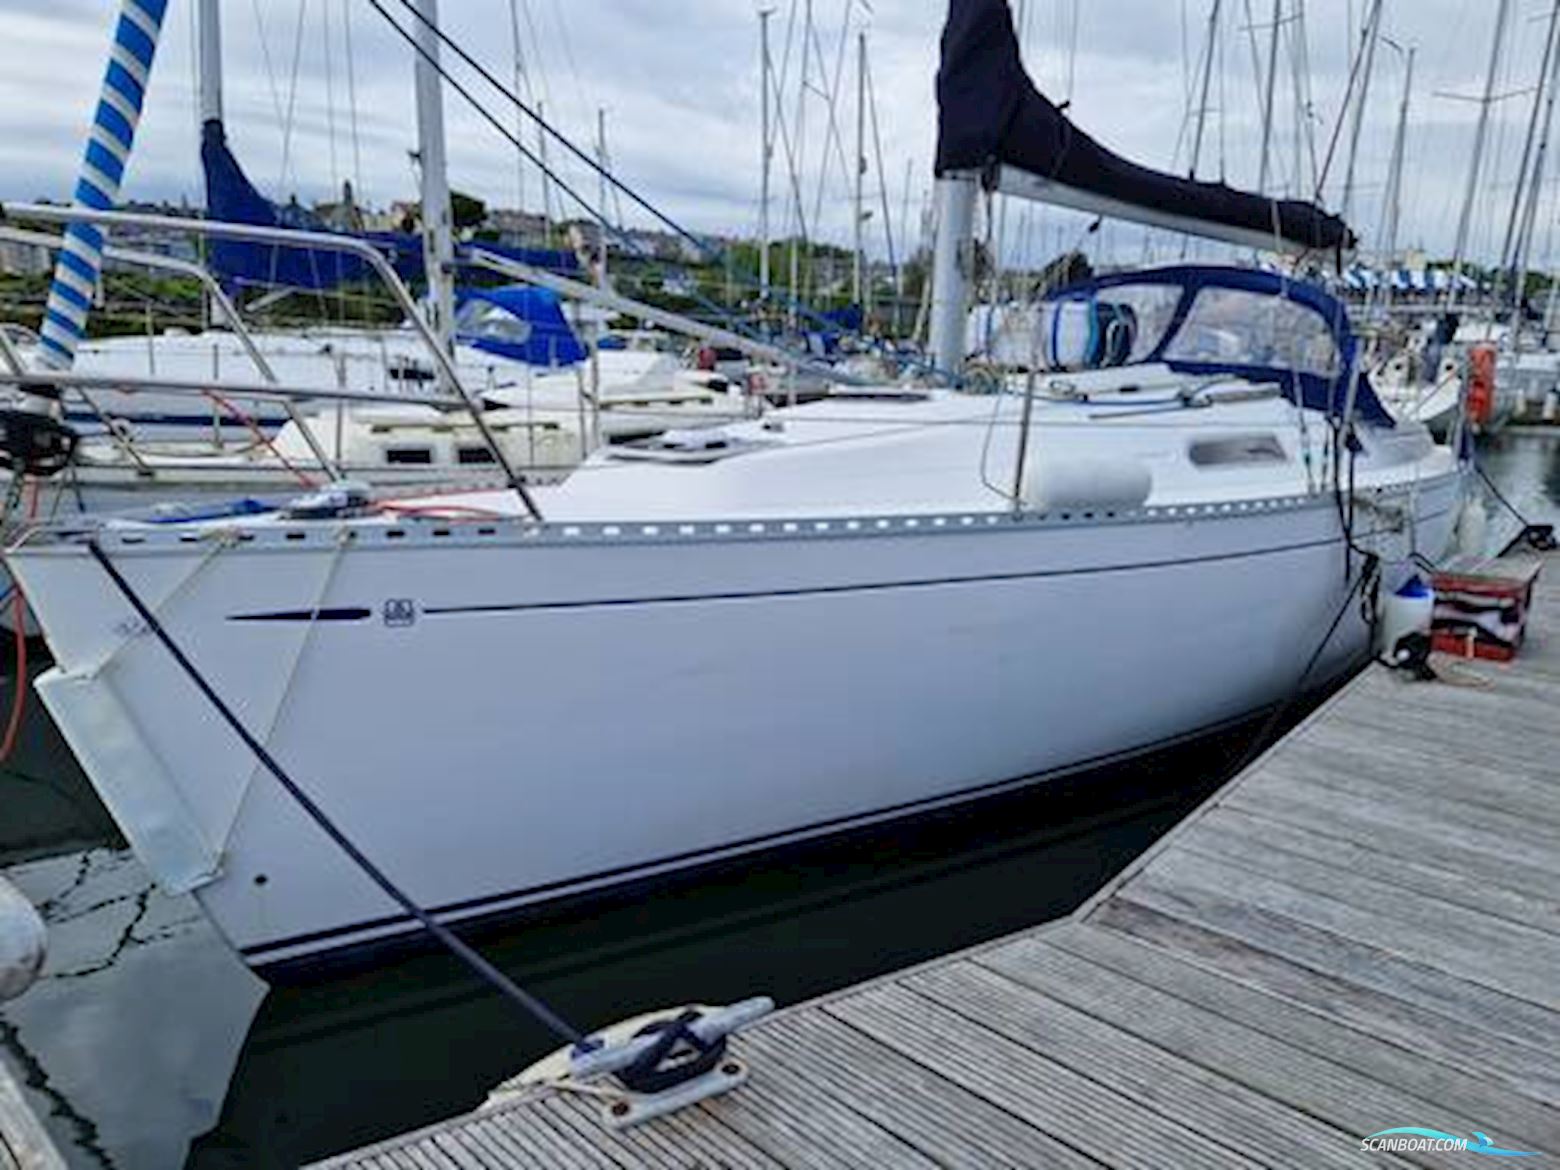 Dufour 30 Classic Sailing boat 2000, with Volvo Penta MD 2020C engine, Ireland